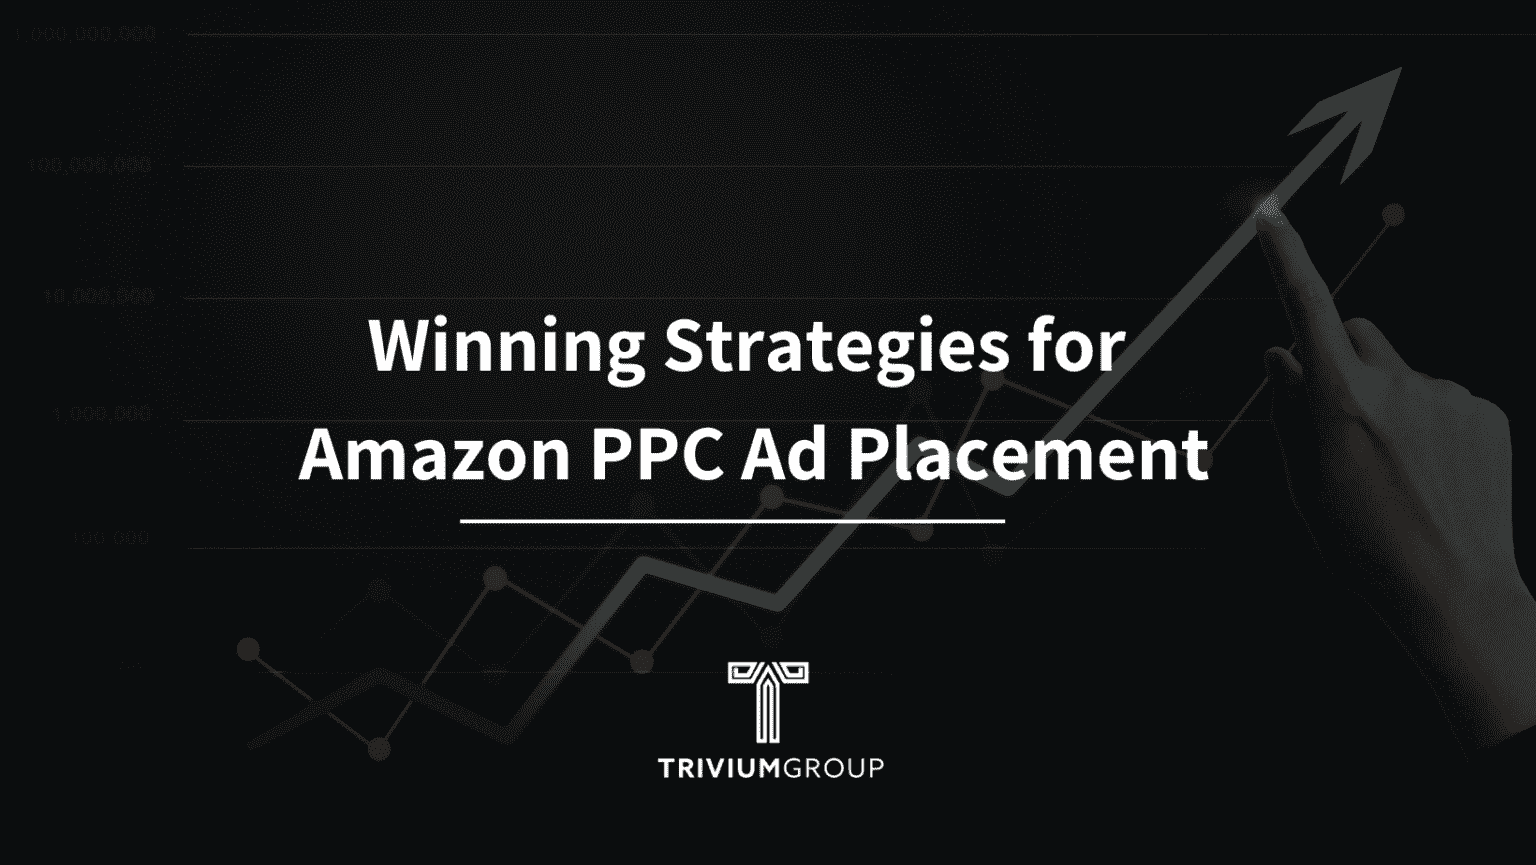 Winning Strategies For Amazon PPC Ad Placement